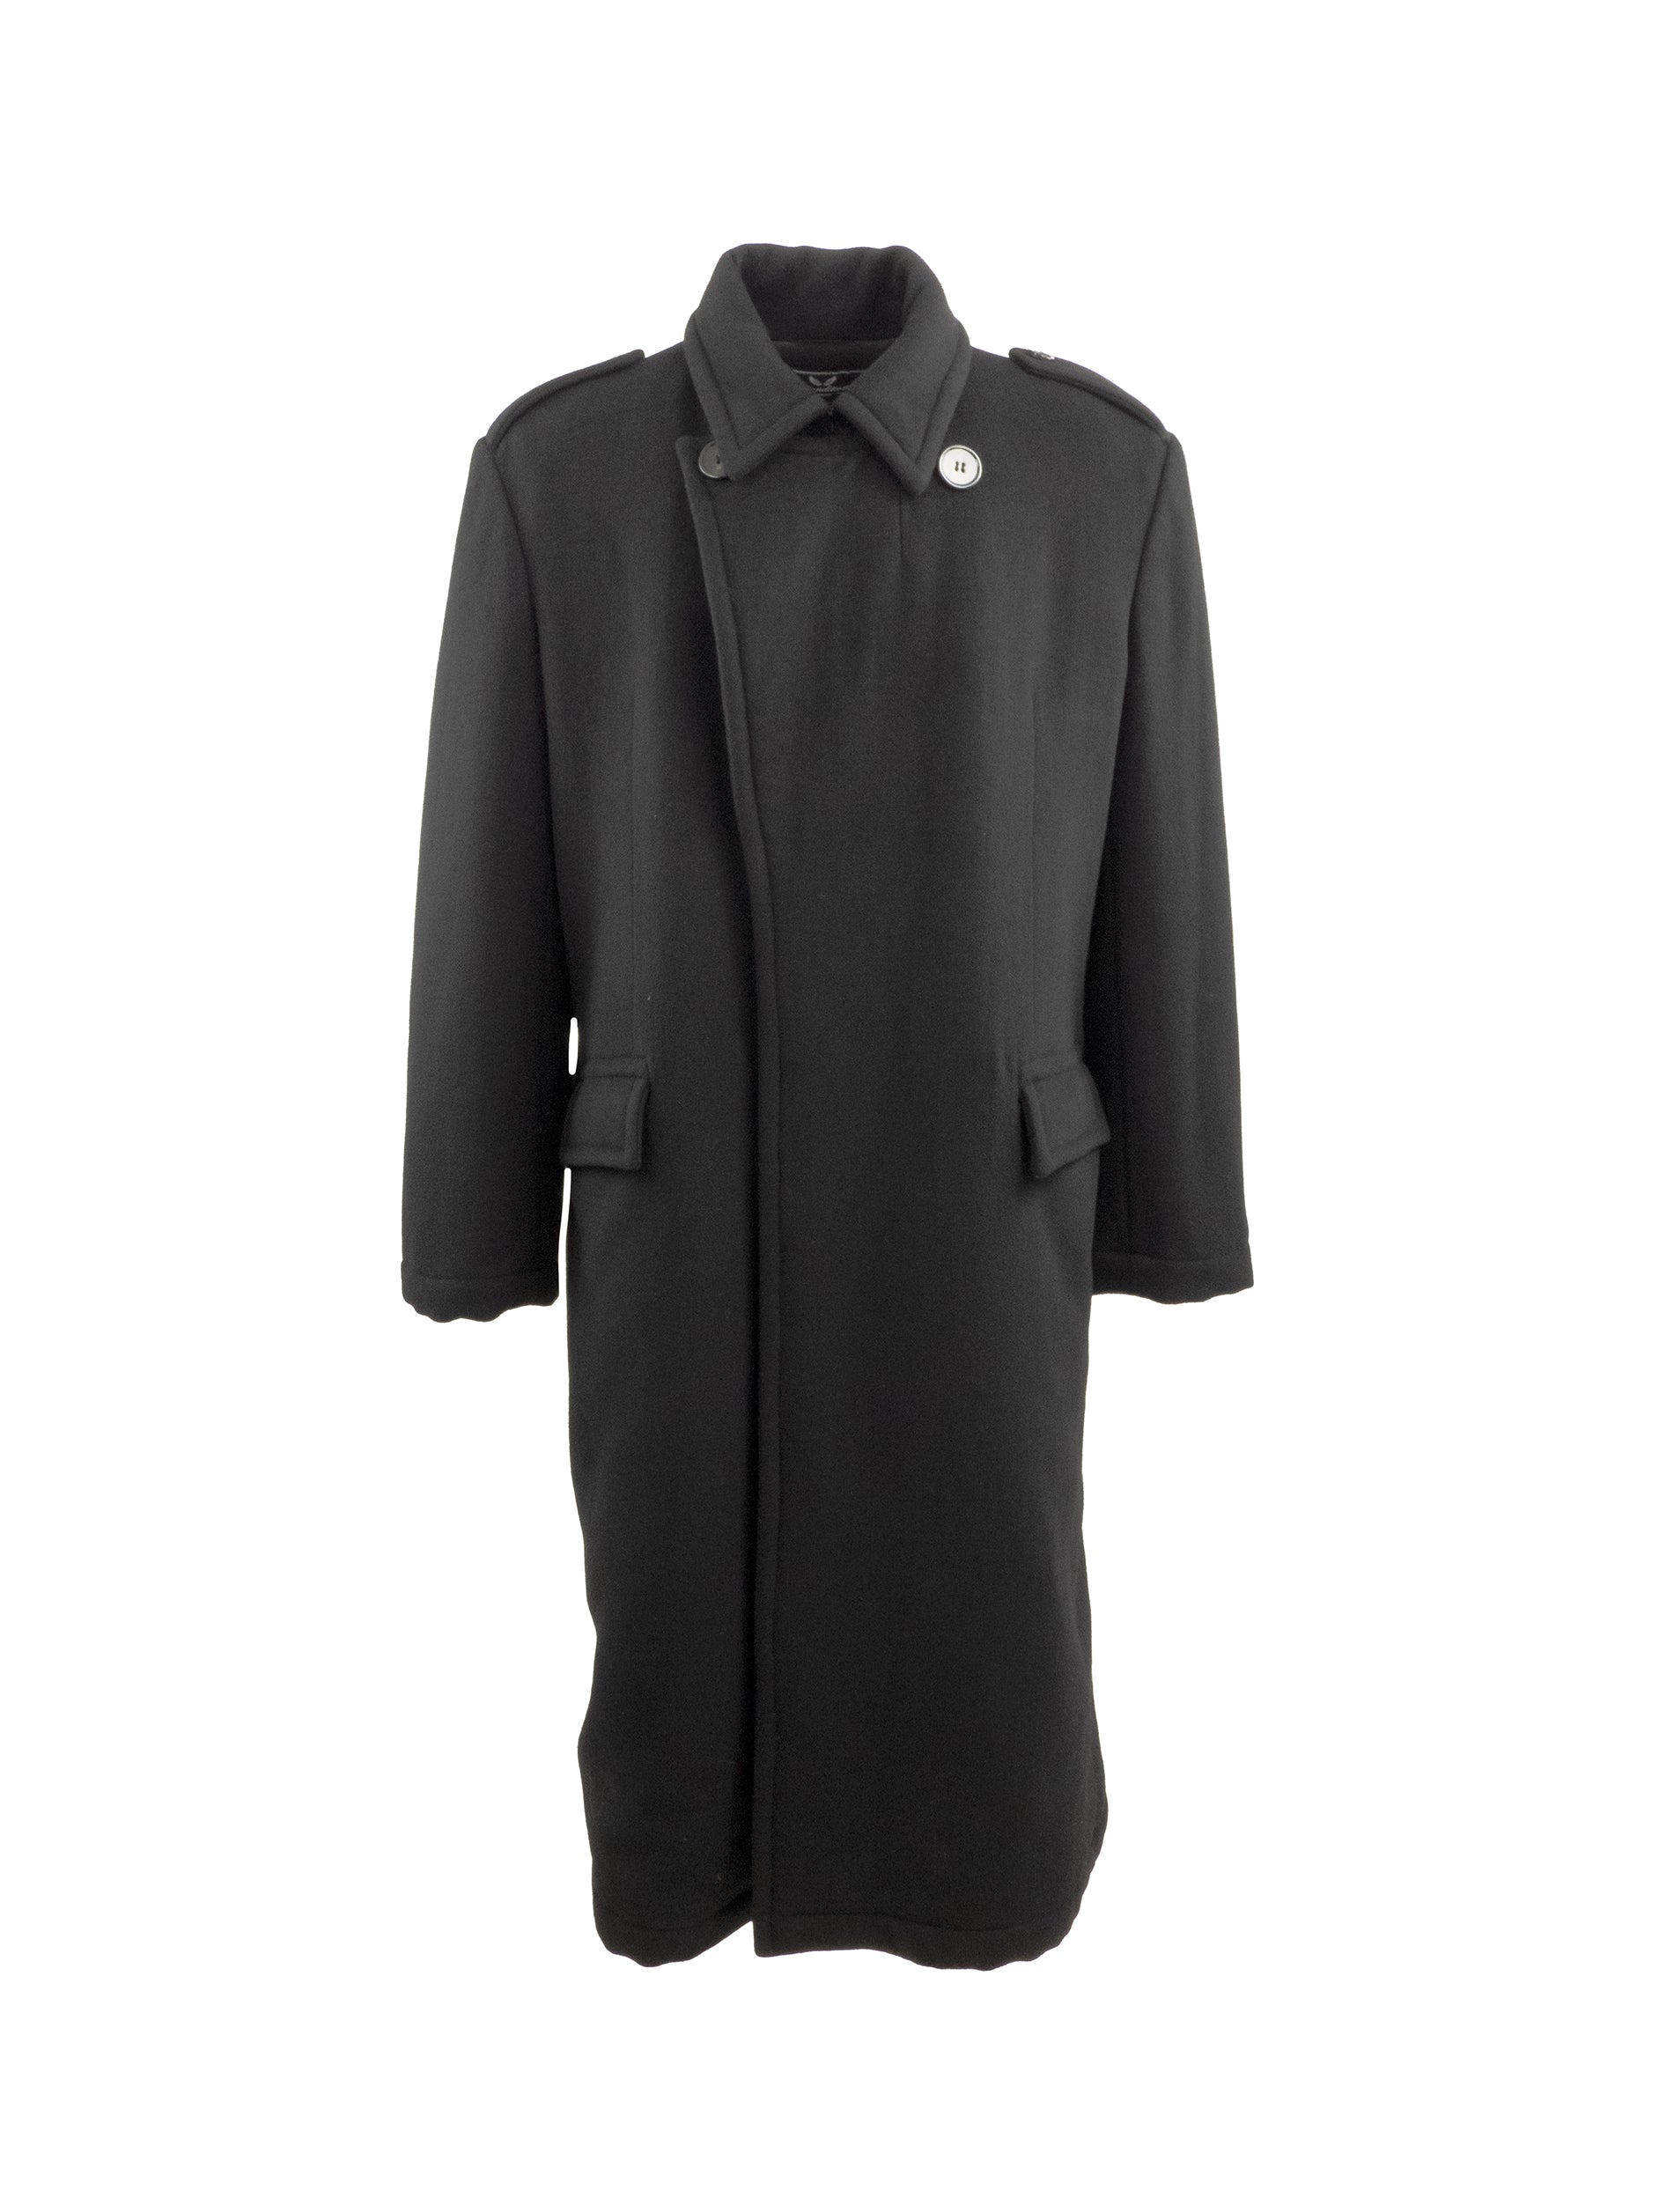 OVERSIZED WOOL OVER COAT WITH SATIN LINING